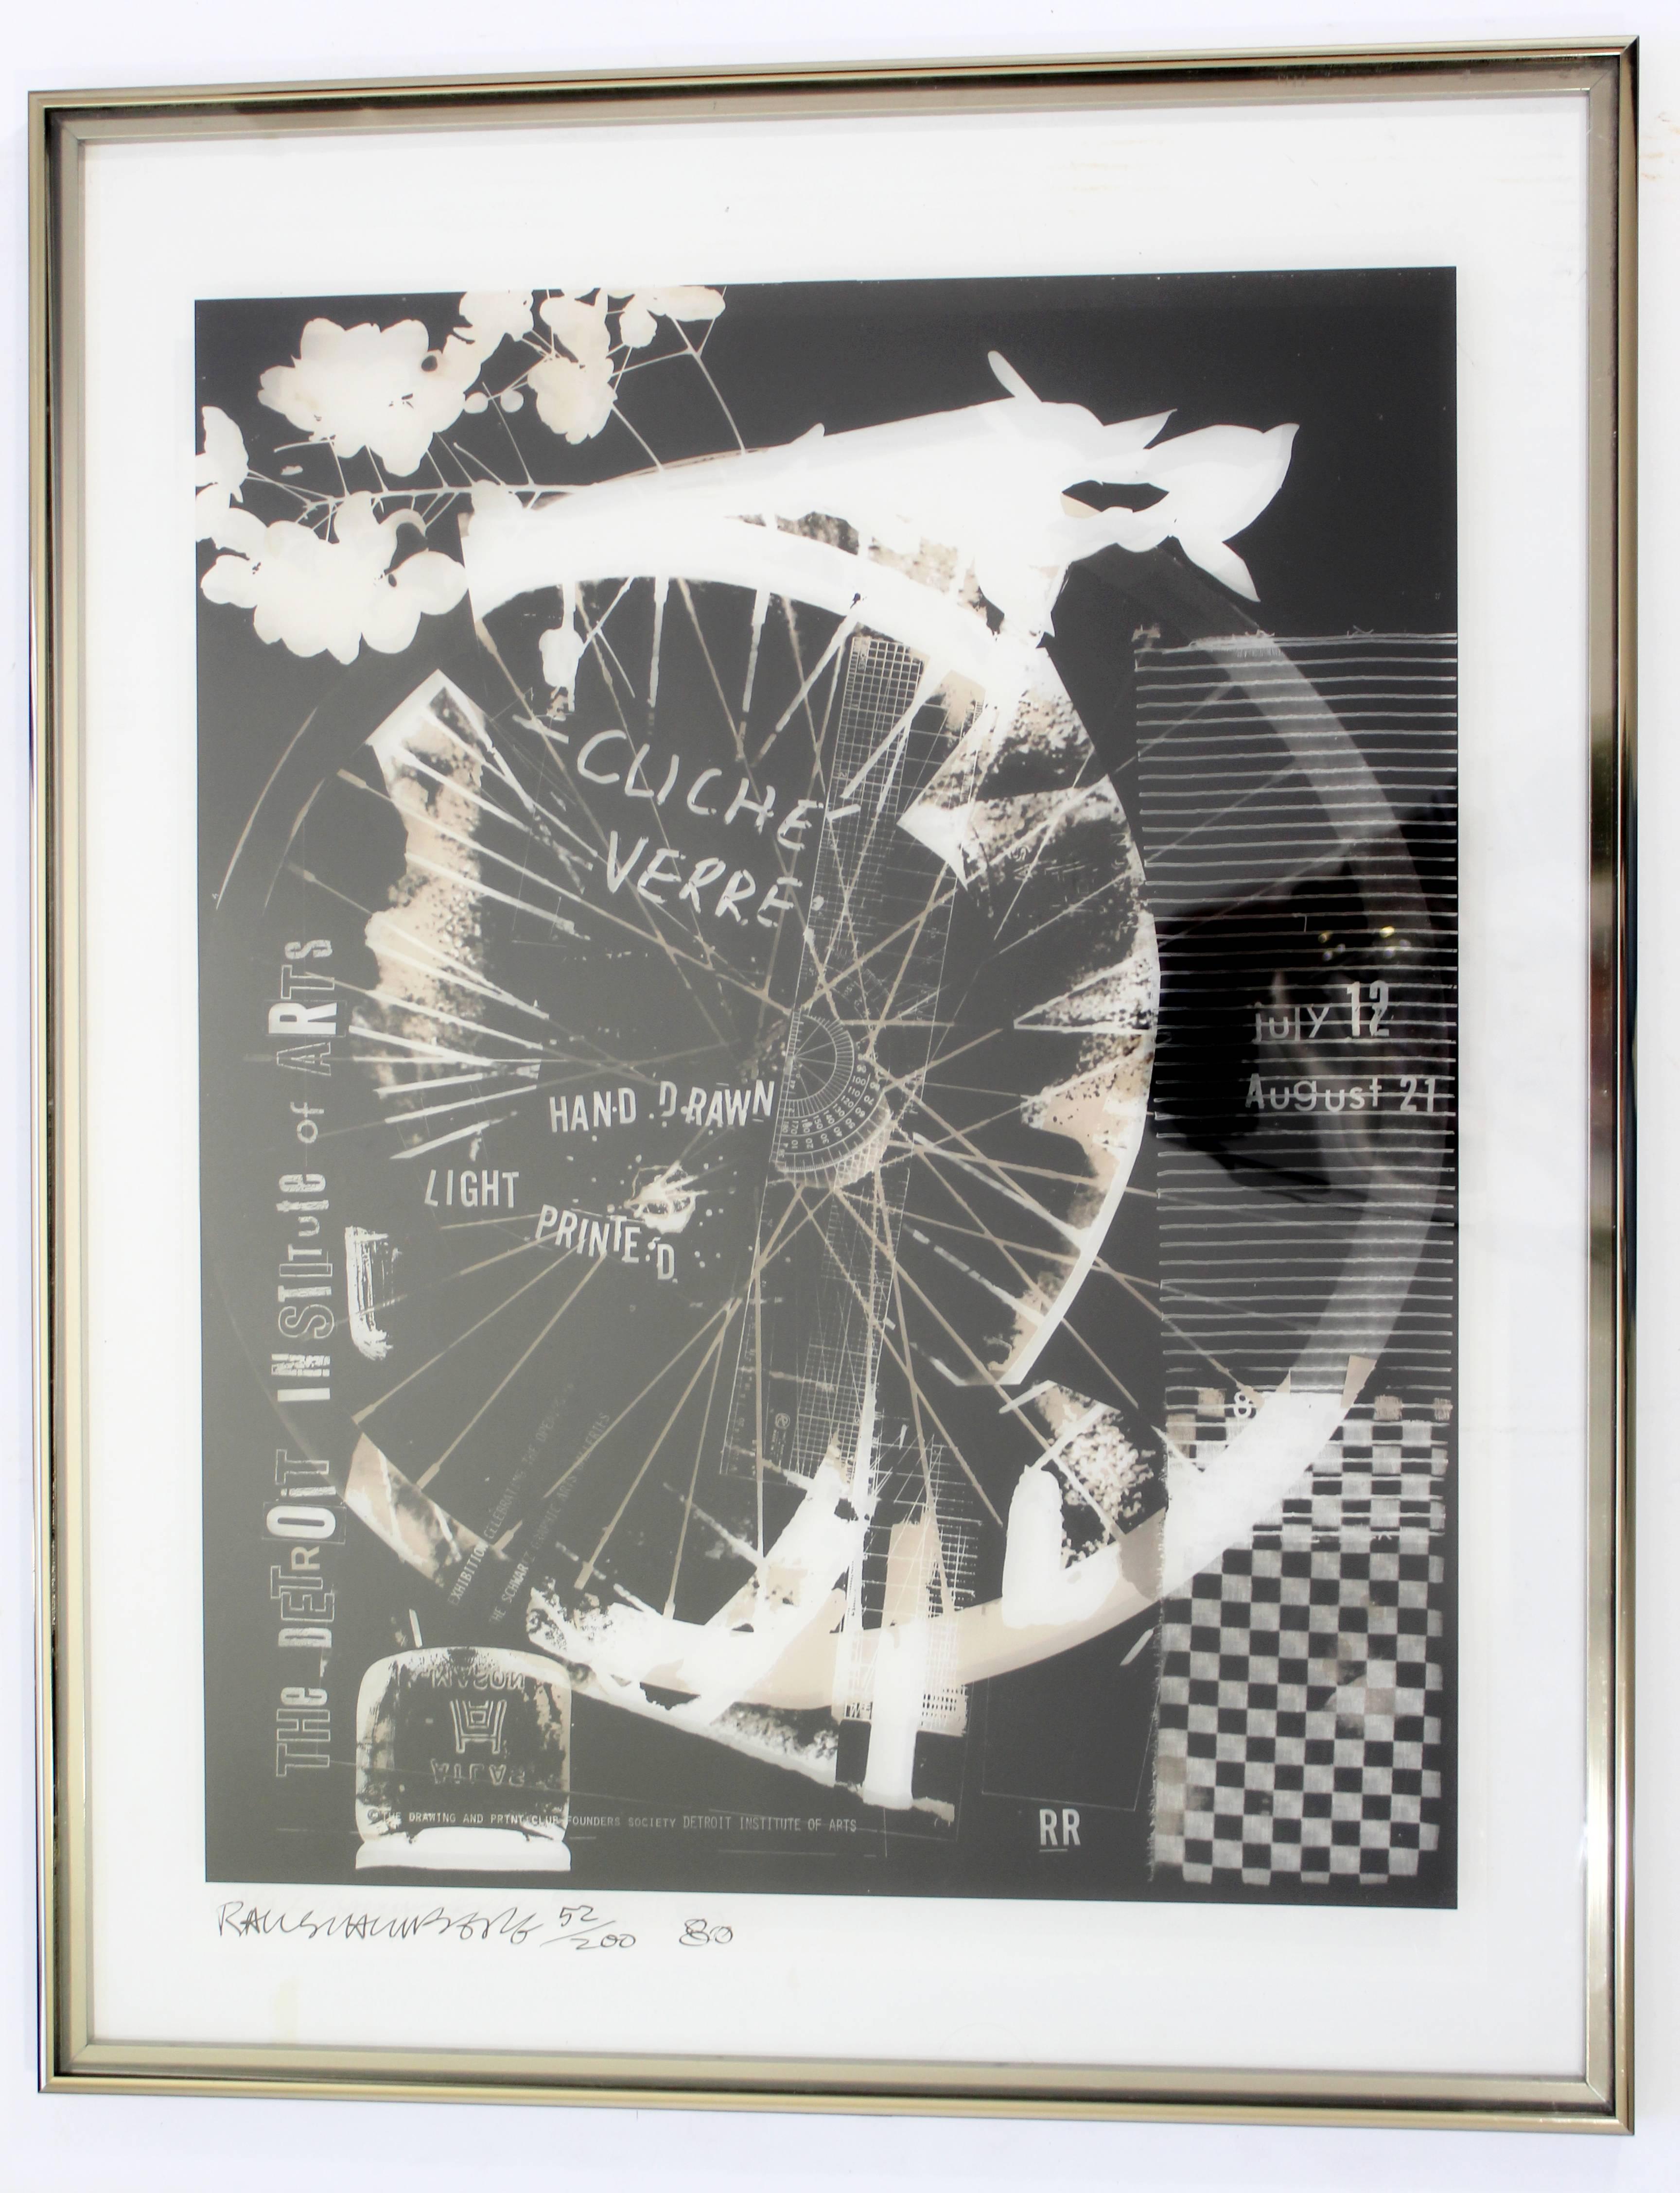 For your consideration is a framed, signed and numbered photolithograph on transparent mylar by Robert Rauschenberg, 52/200. In excellent condition. The dimensions are 23